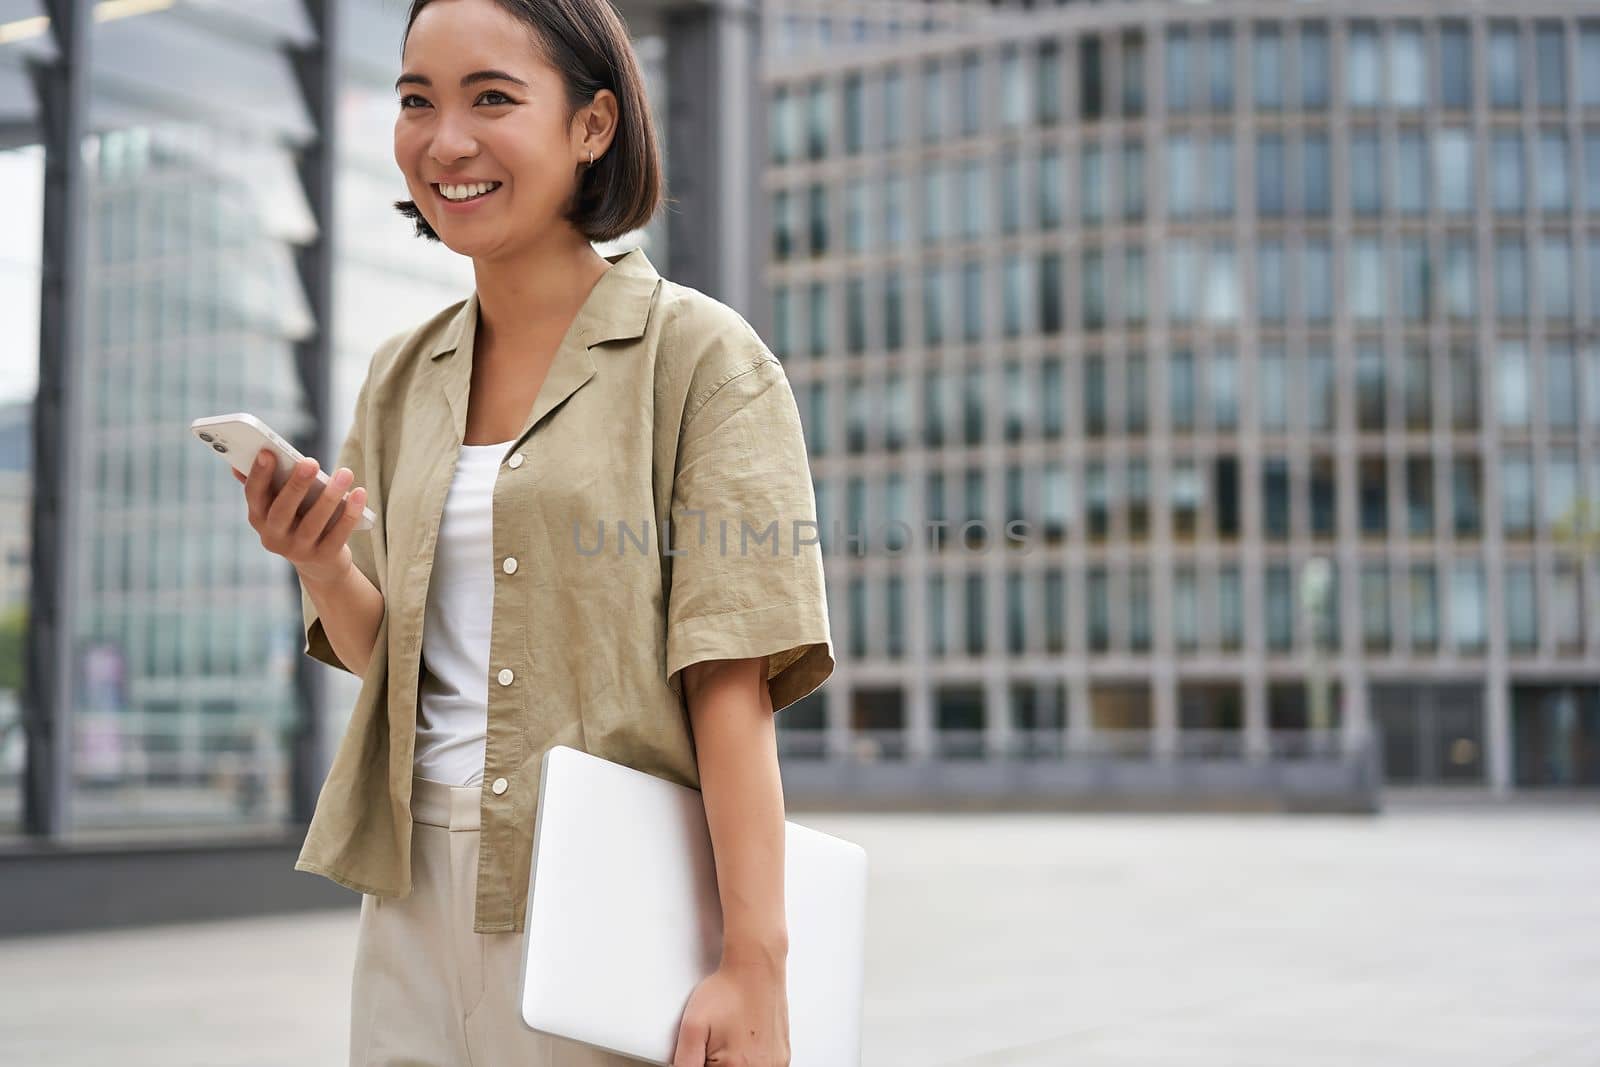 Portrait of asian girl with laptop, going to work or uni, holding smartphone and smiling, walking on street.